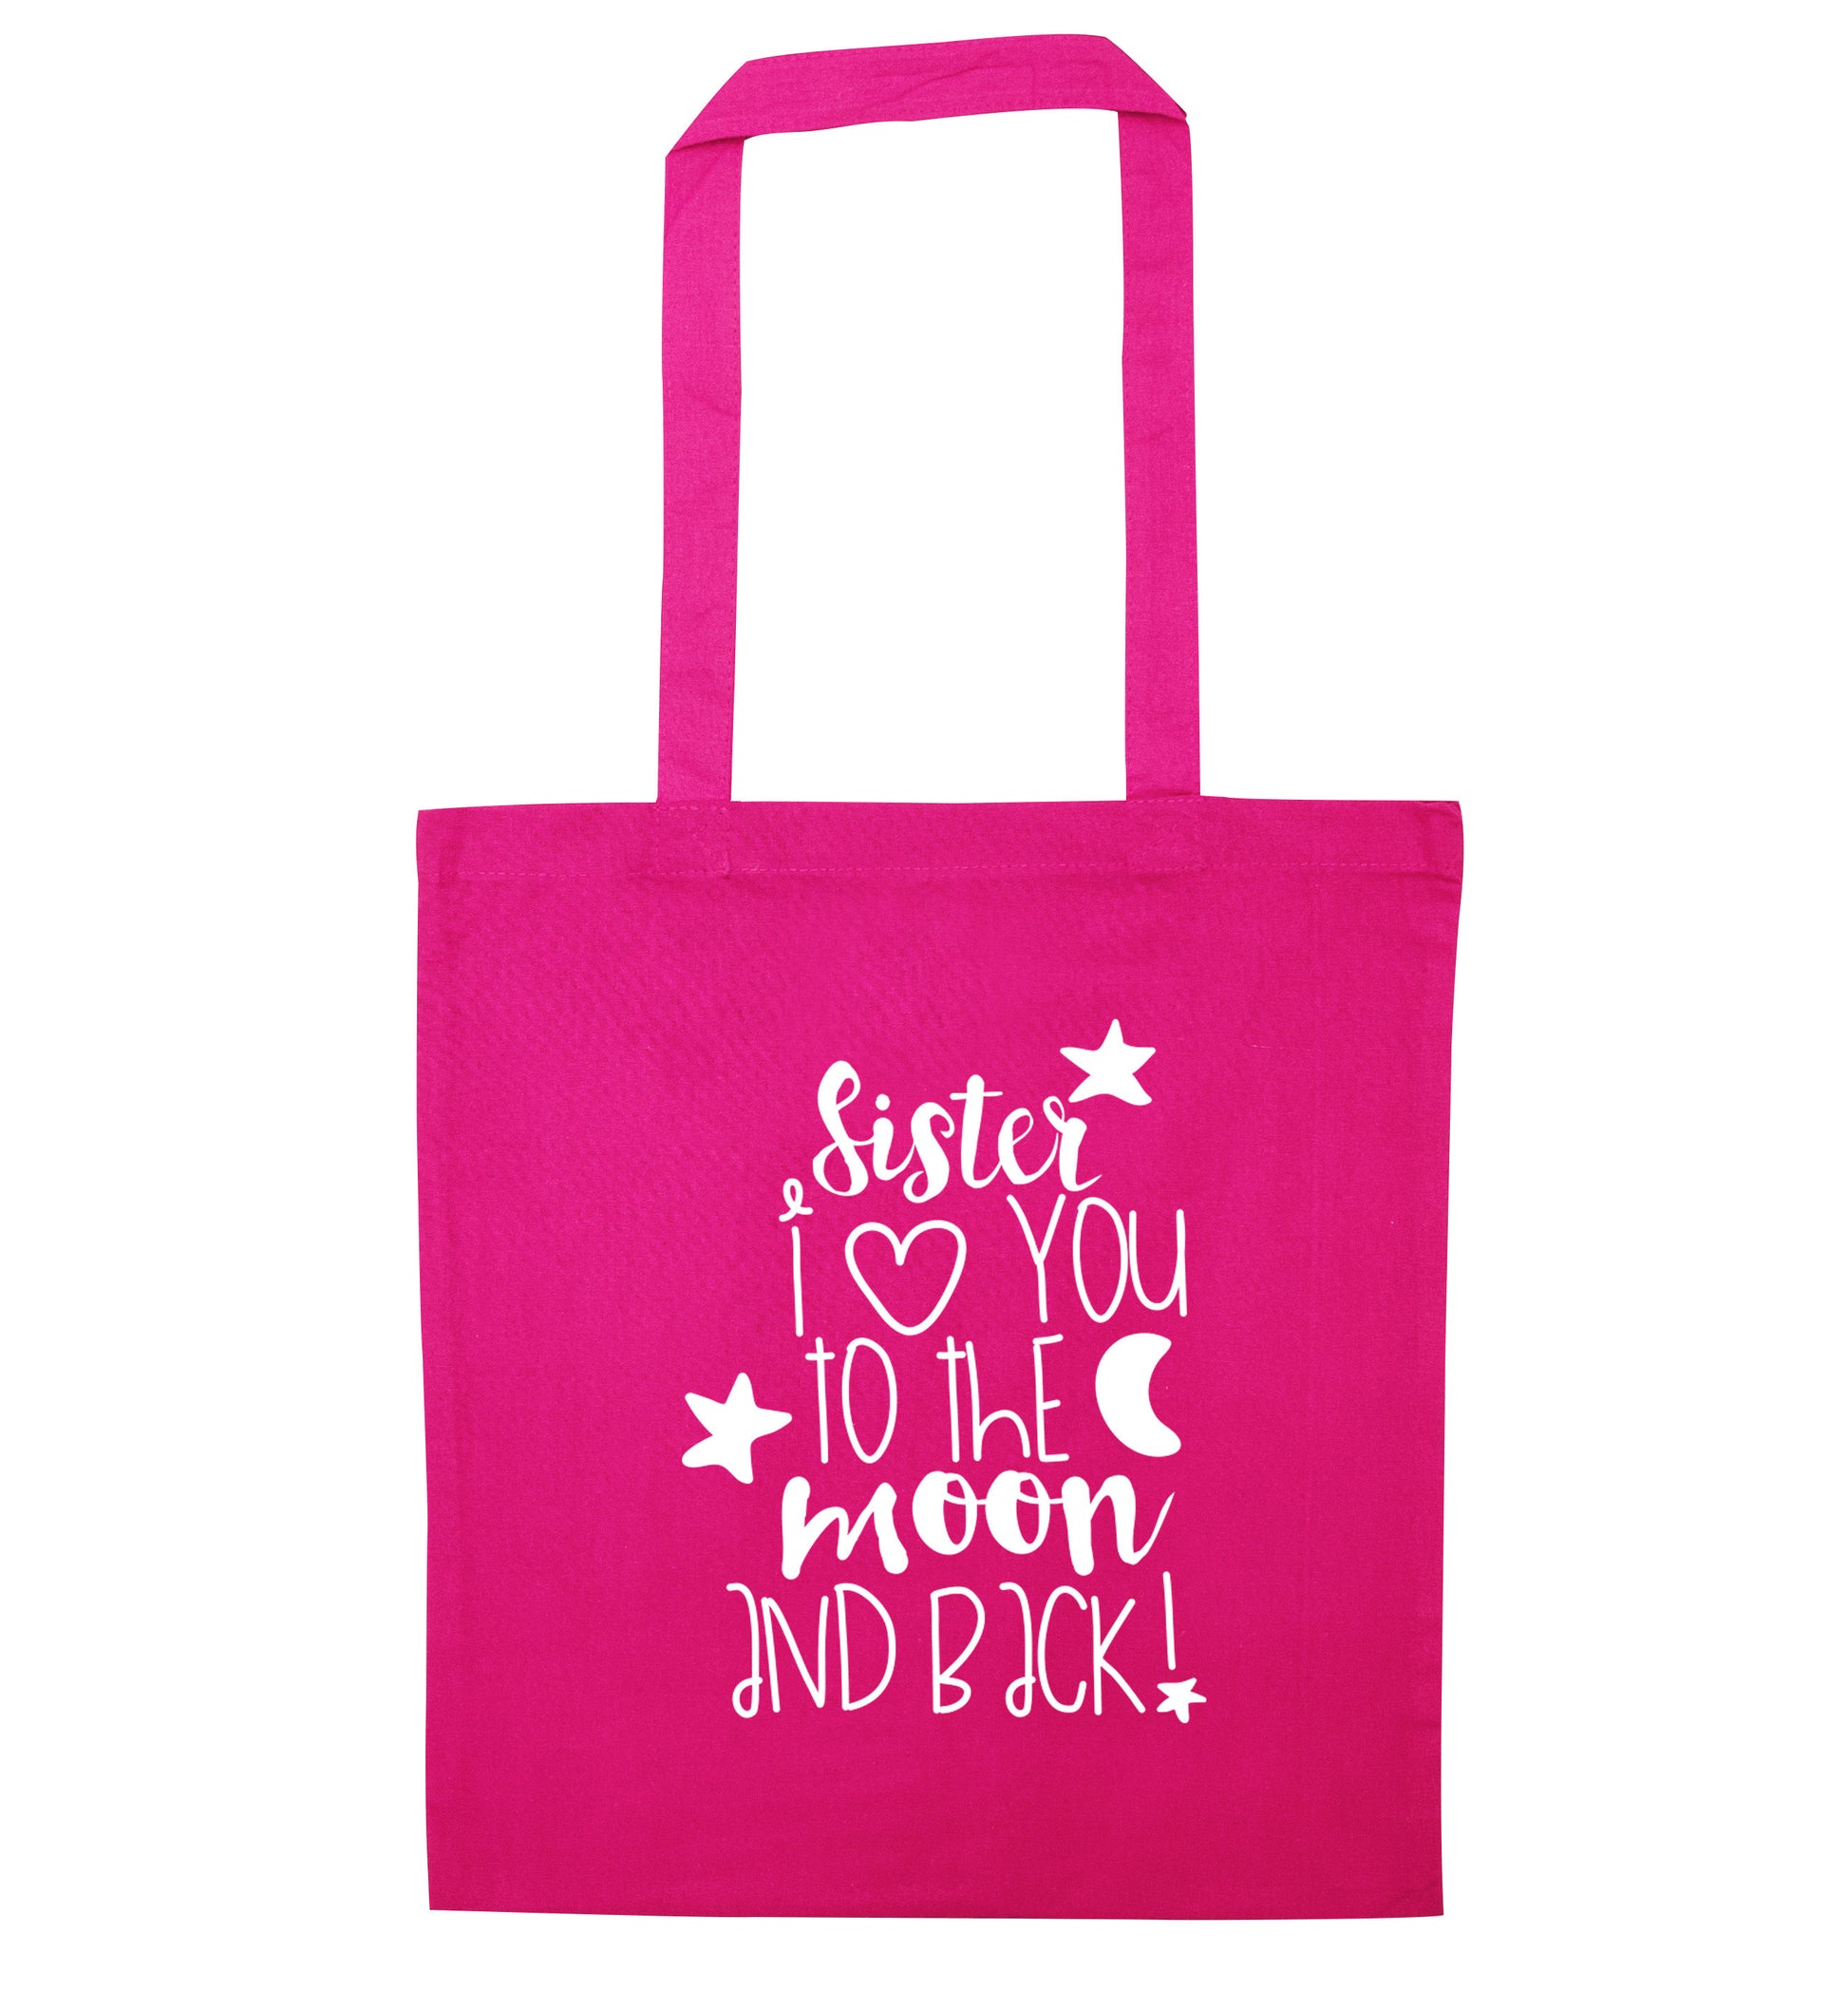 Sister I love you to the moon and back pink tote bag